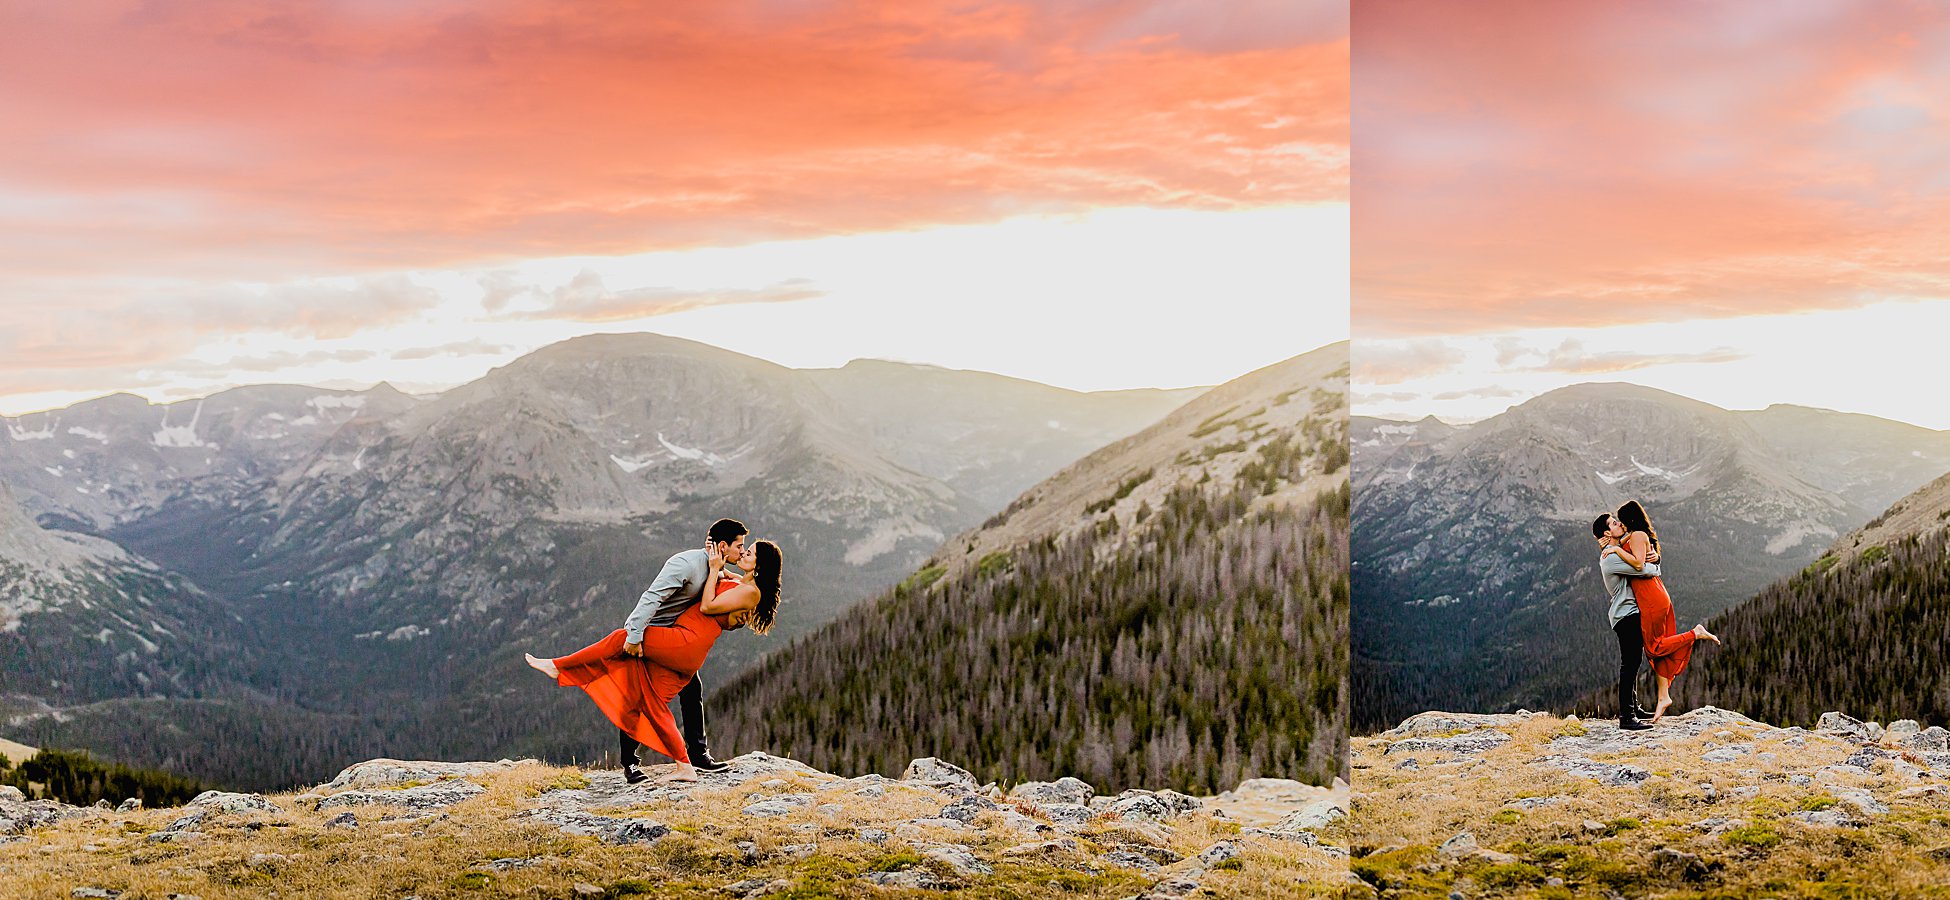 couple has rocky mountain national park adventure photos taken at sunset with stunning colorado landscape